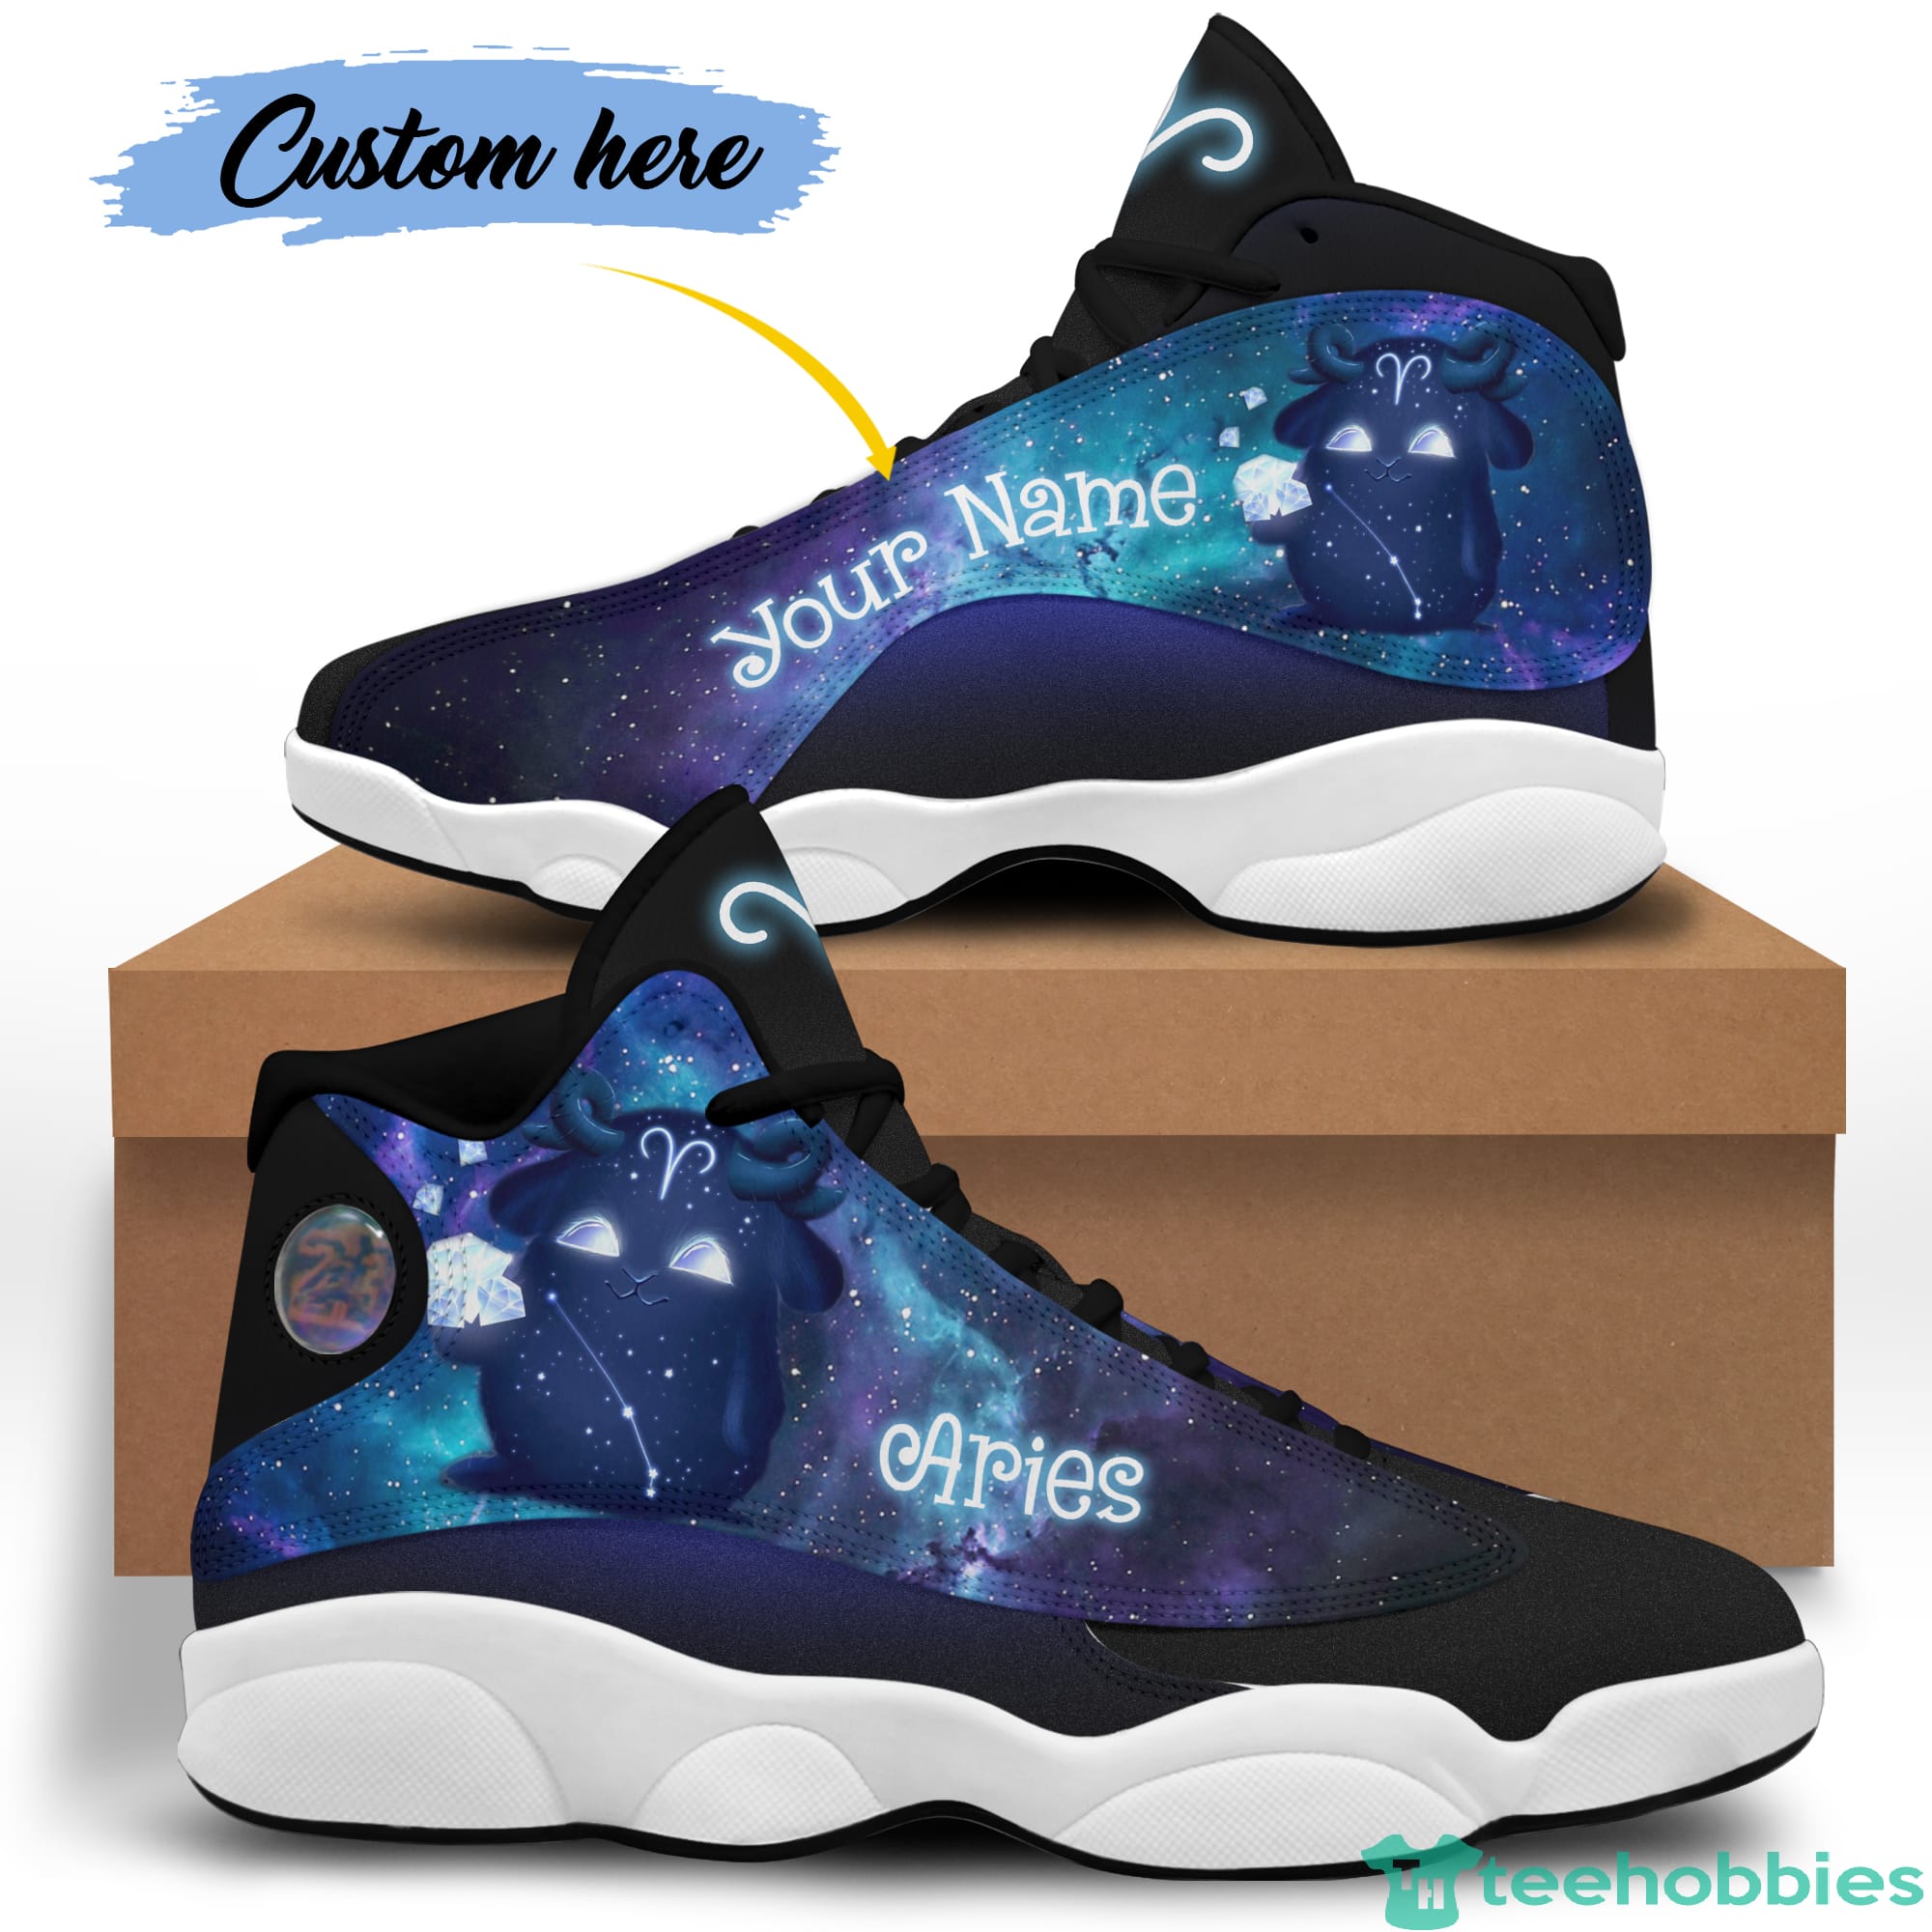 Aries Birthday Gift Personalized Name Personalized Name Air Jordan 13 Shoes SKU268